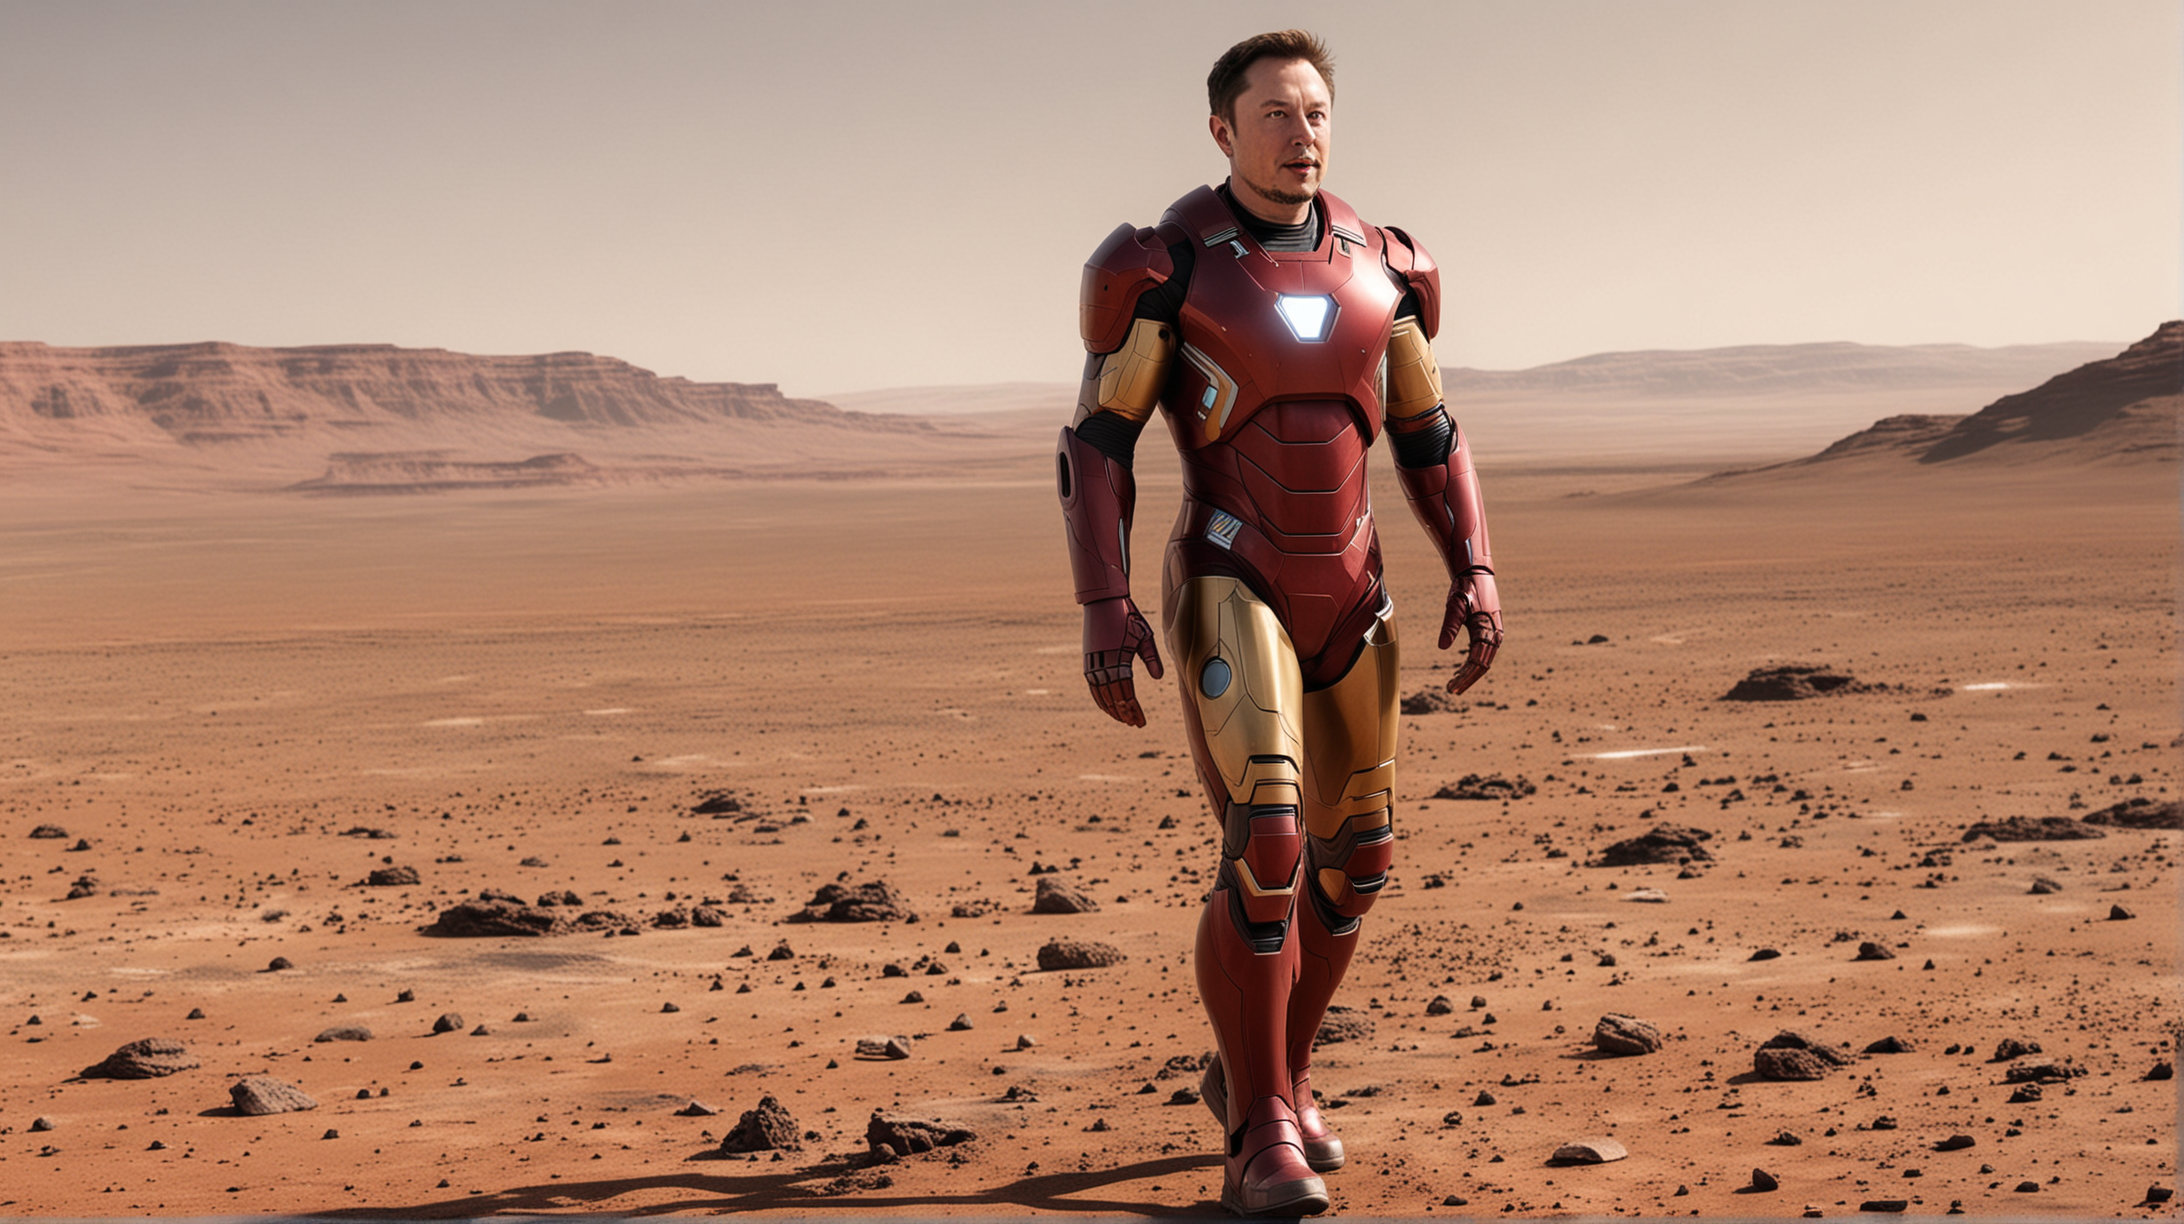 ELON MUSK AS IRON MAN LANDING ON MARS WITH DIFFERENT Color suit